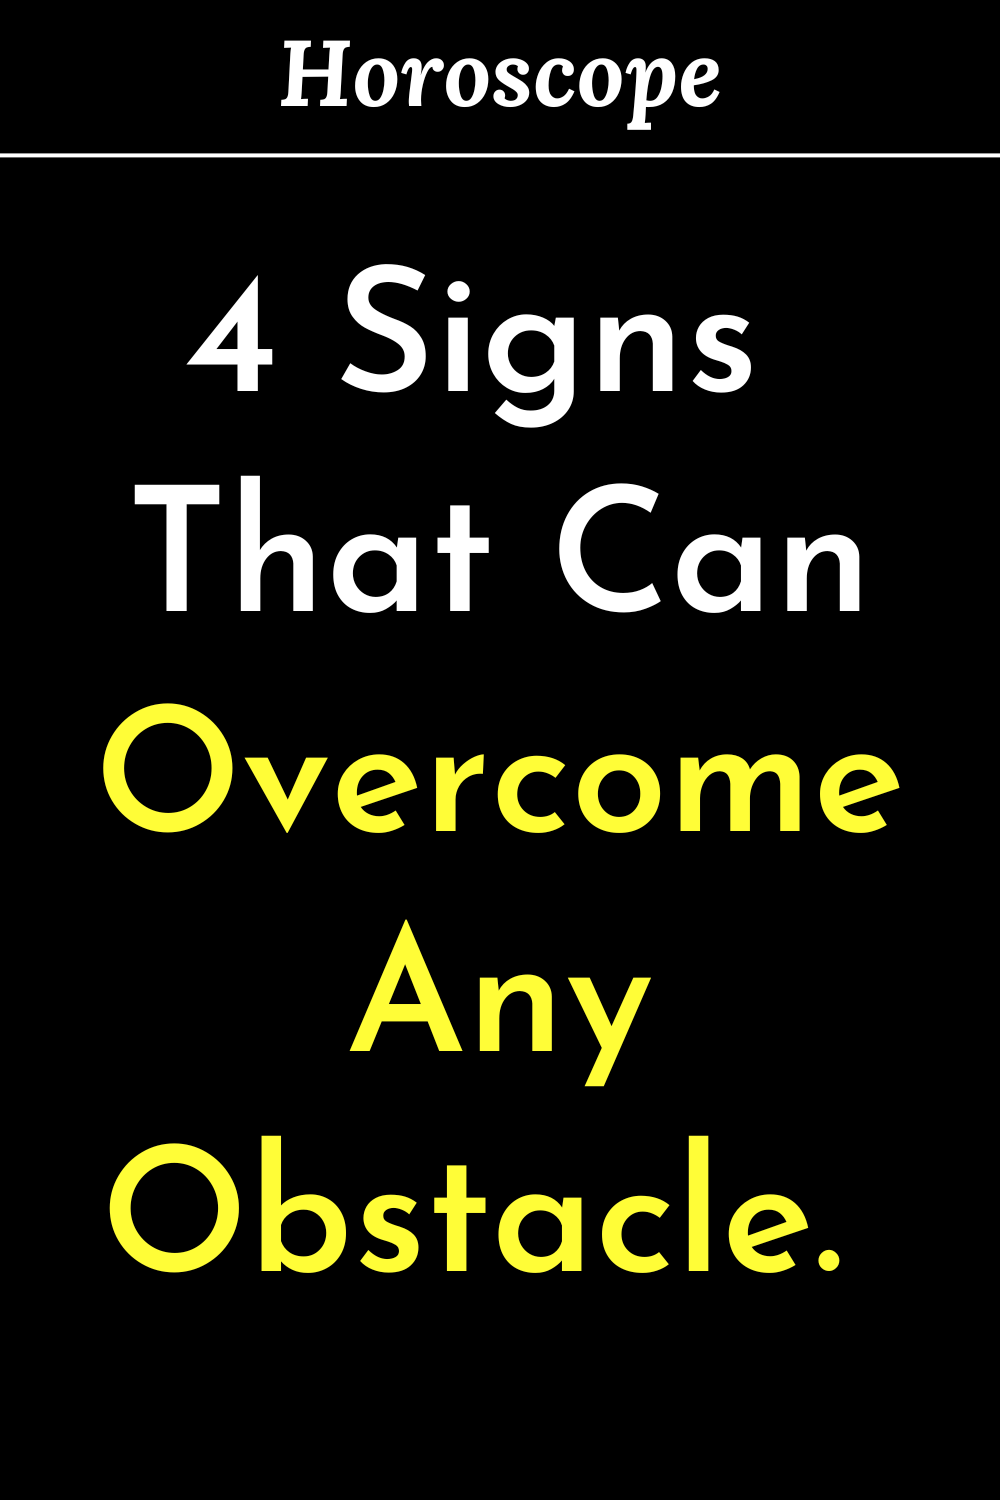 4 Signs That Can Overcome Any Obstacle. Nothing Can Bring Them Down!